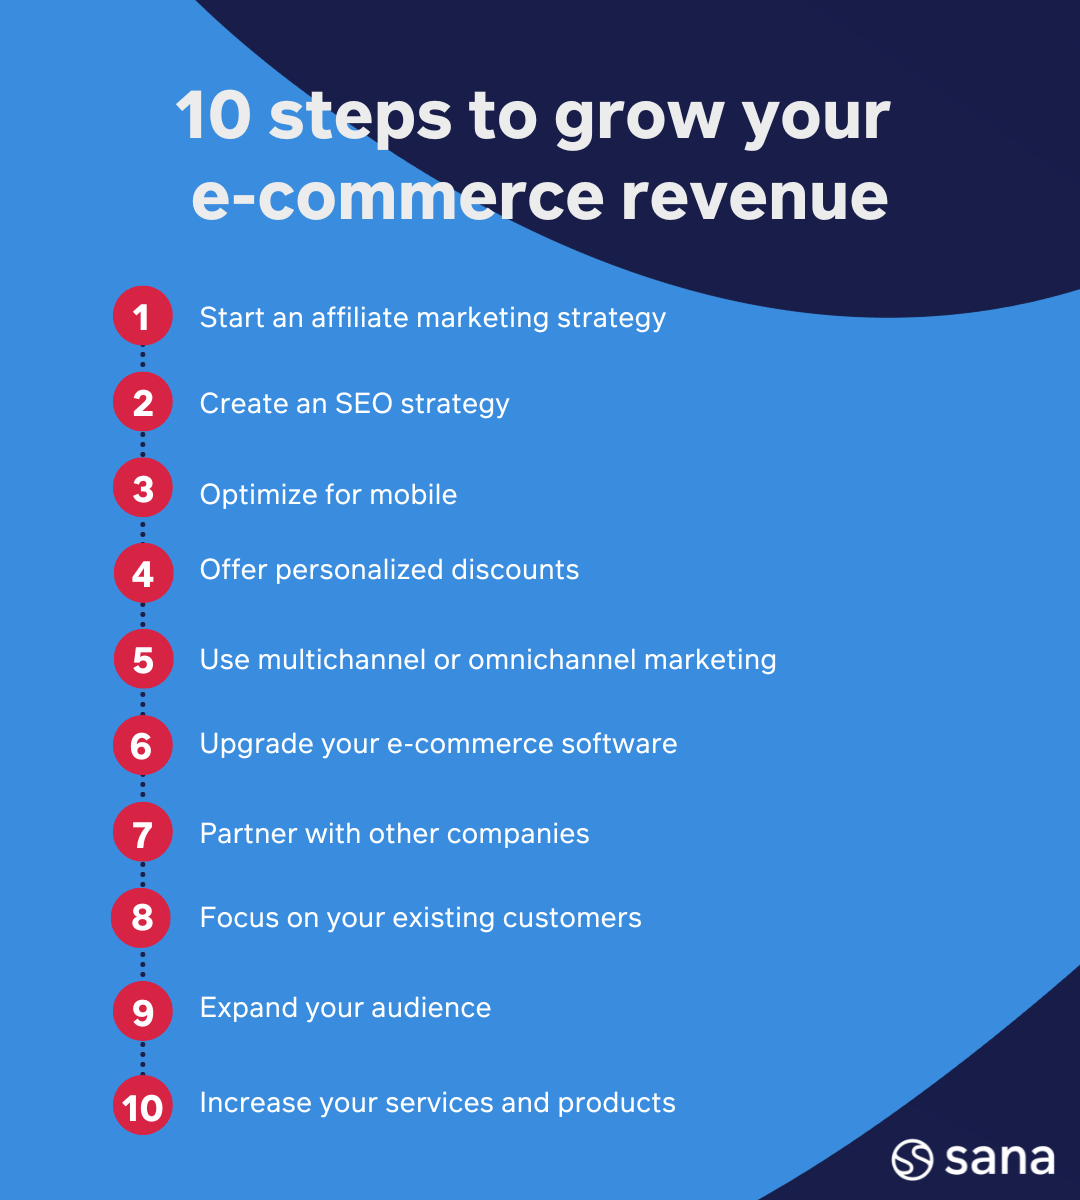 How to increase your online revenue with your e-commerce store - 10 steps